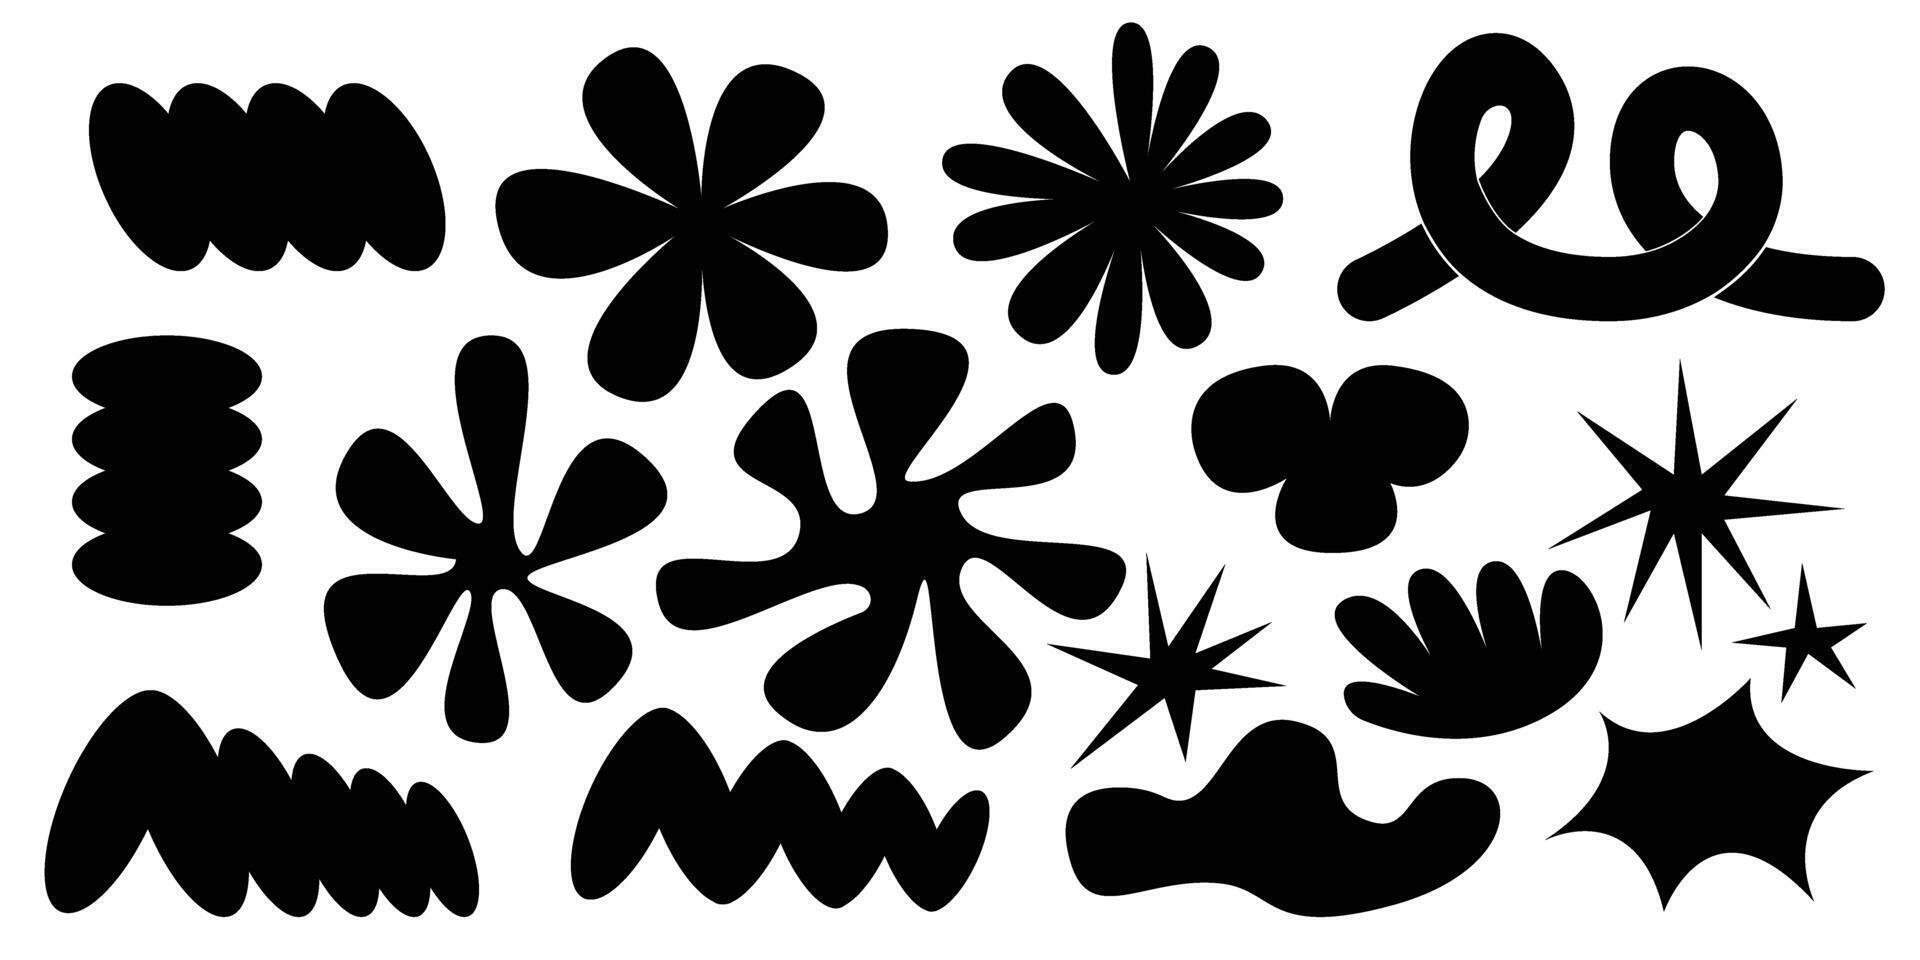 Set of abstract retro y2k shapes. Vector sticker pack. Collection of contemporary forms, funny flower, bubble, star, loop in trendy 70s, 90s groovy cartoon style